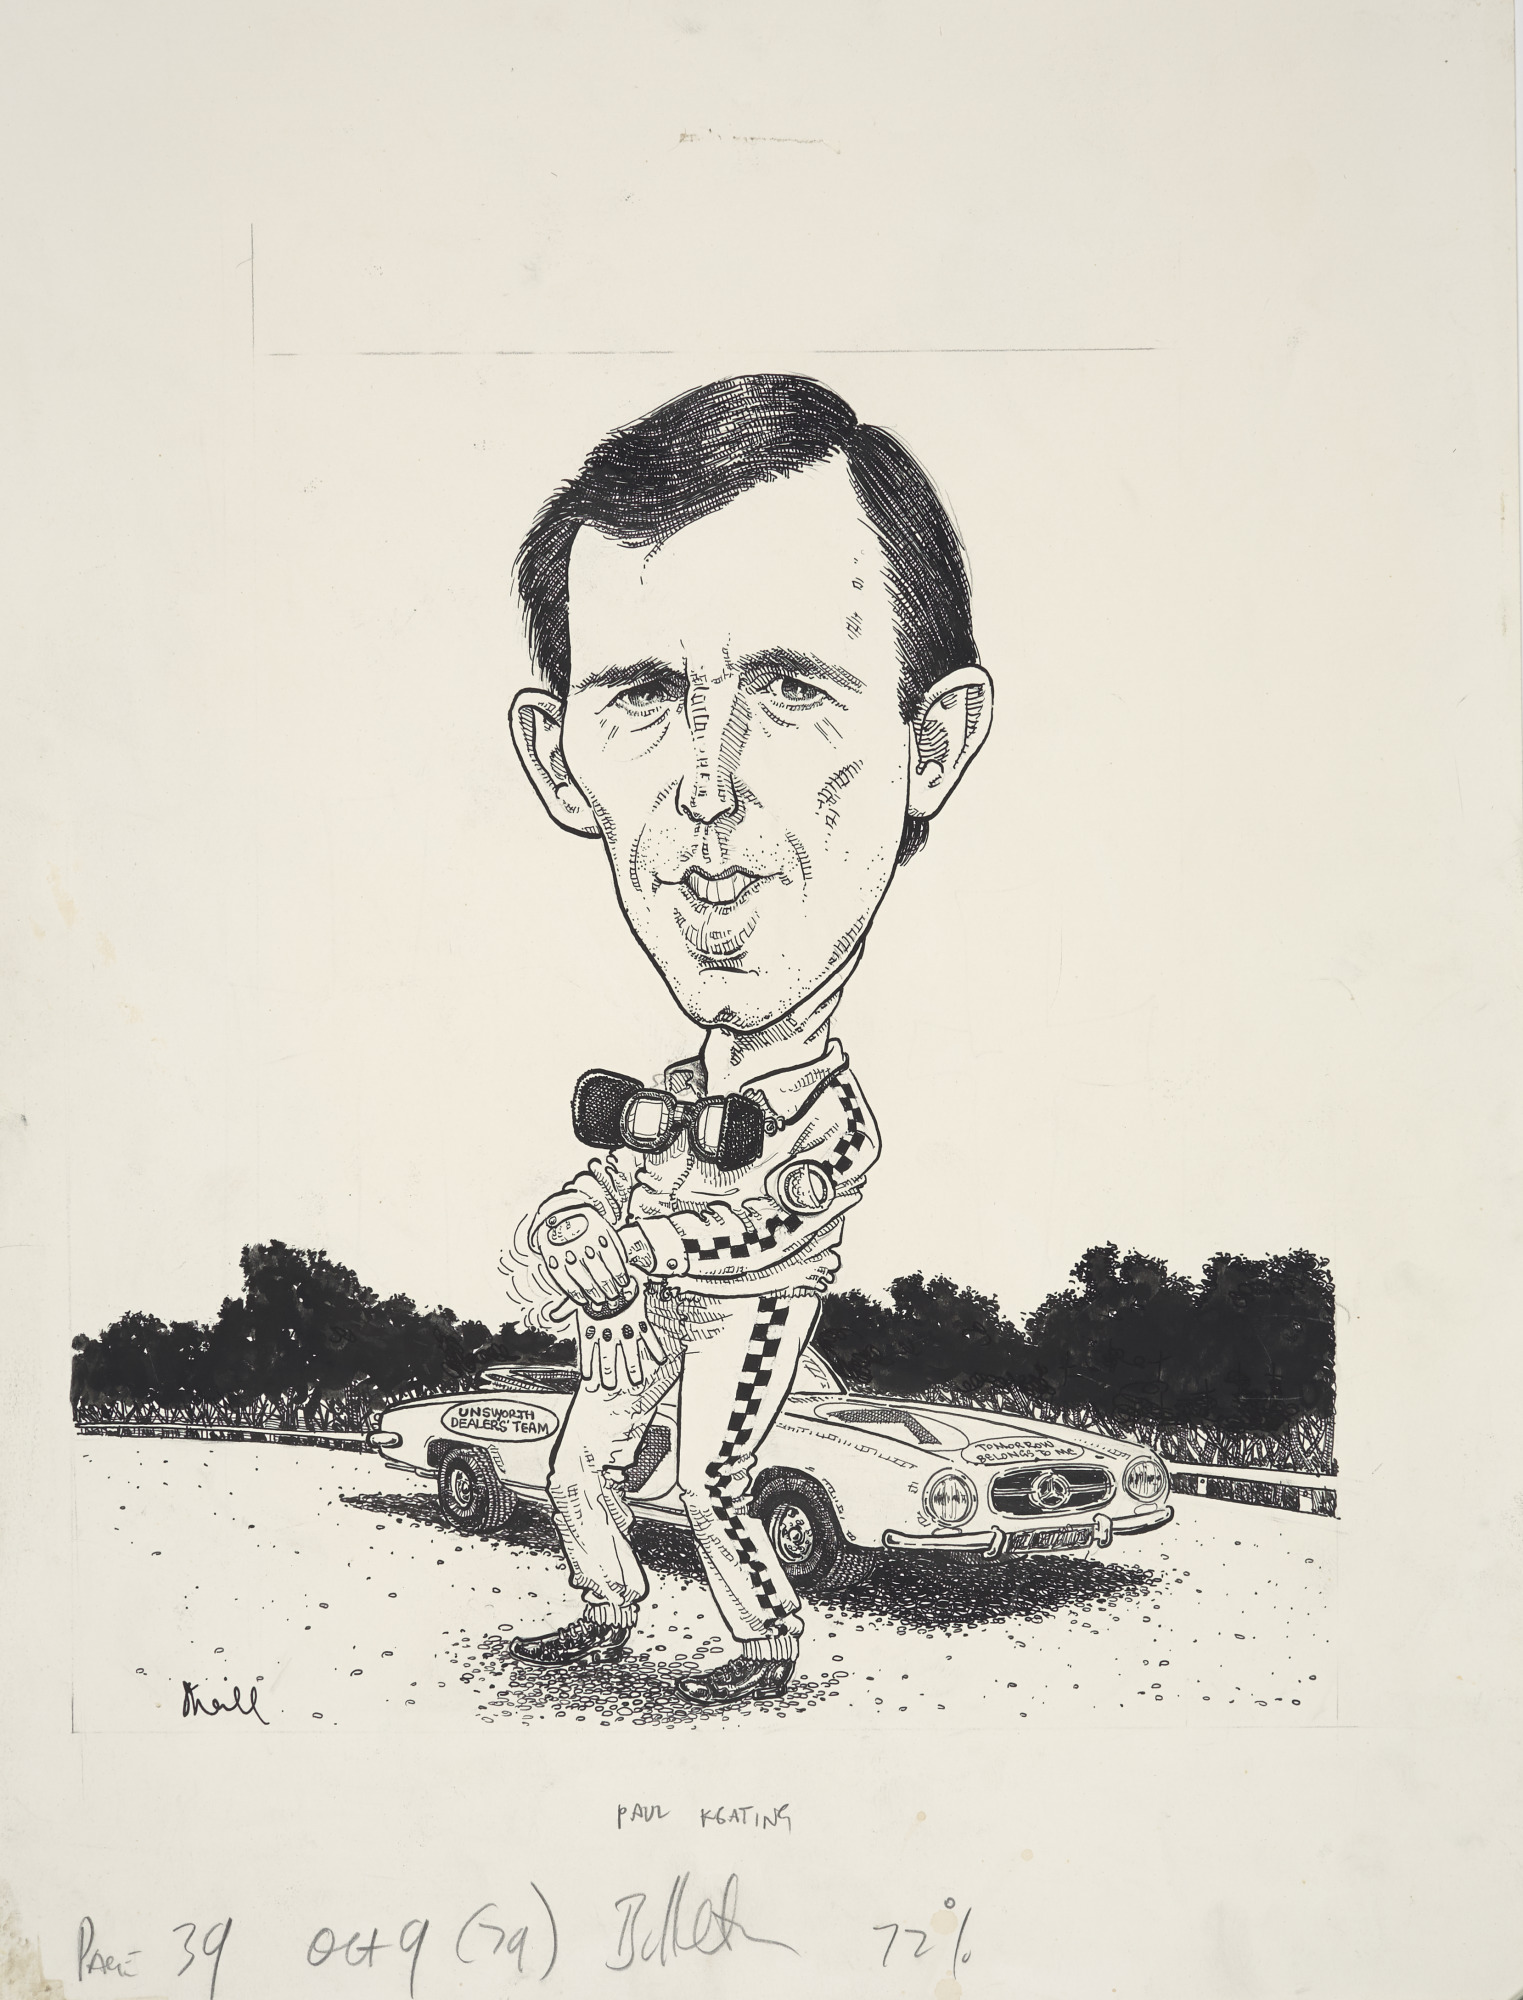 Cartoon of federal Labor politician Paul Keating as a racing car driver, published in the Bulletin, 9 October 1979. 